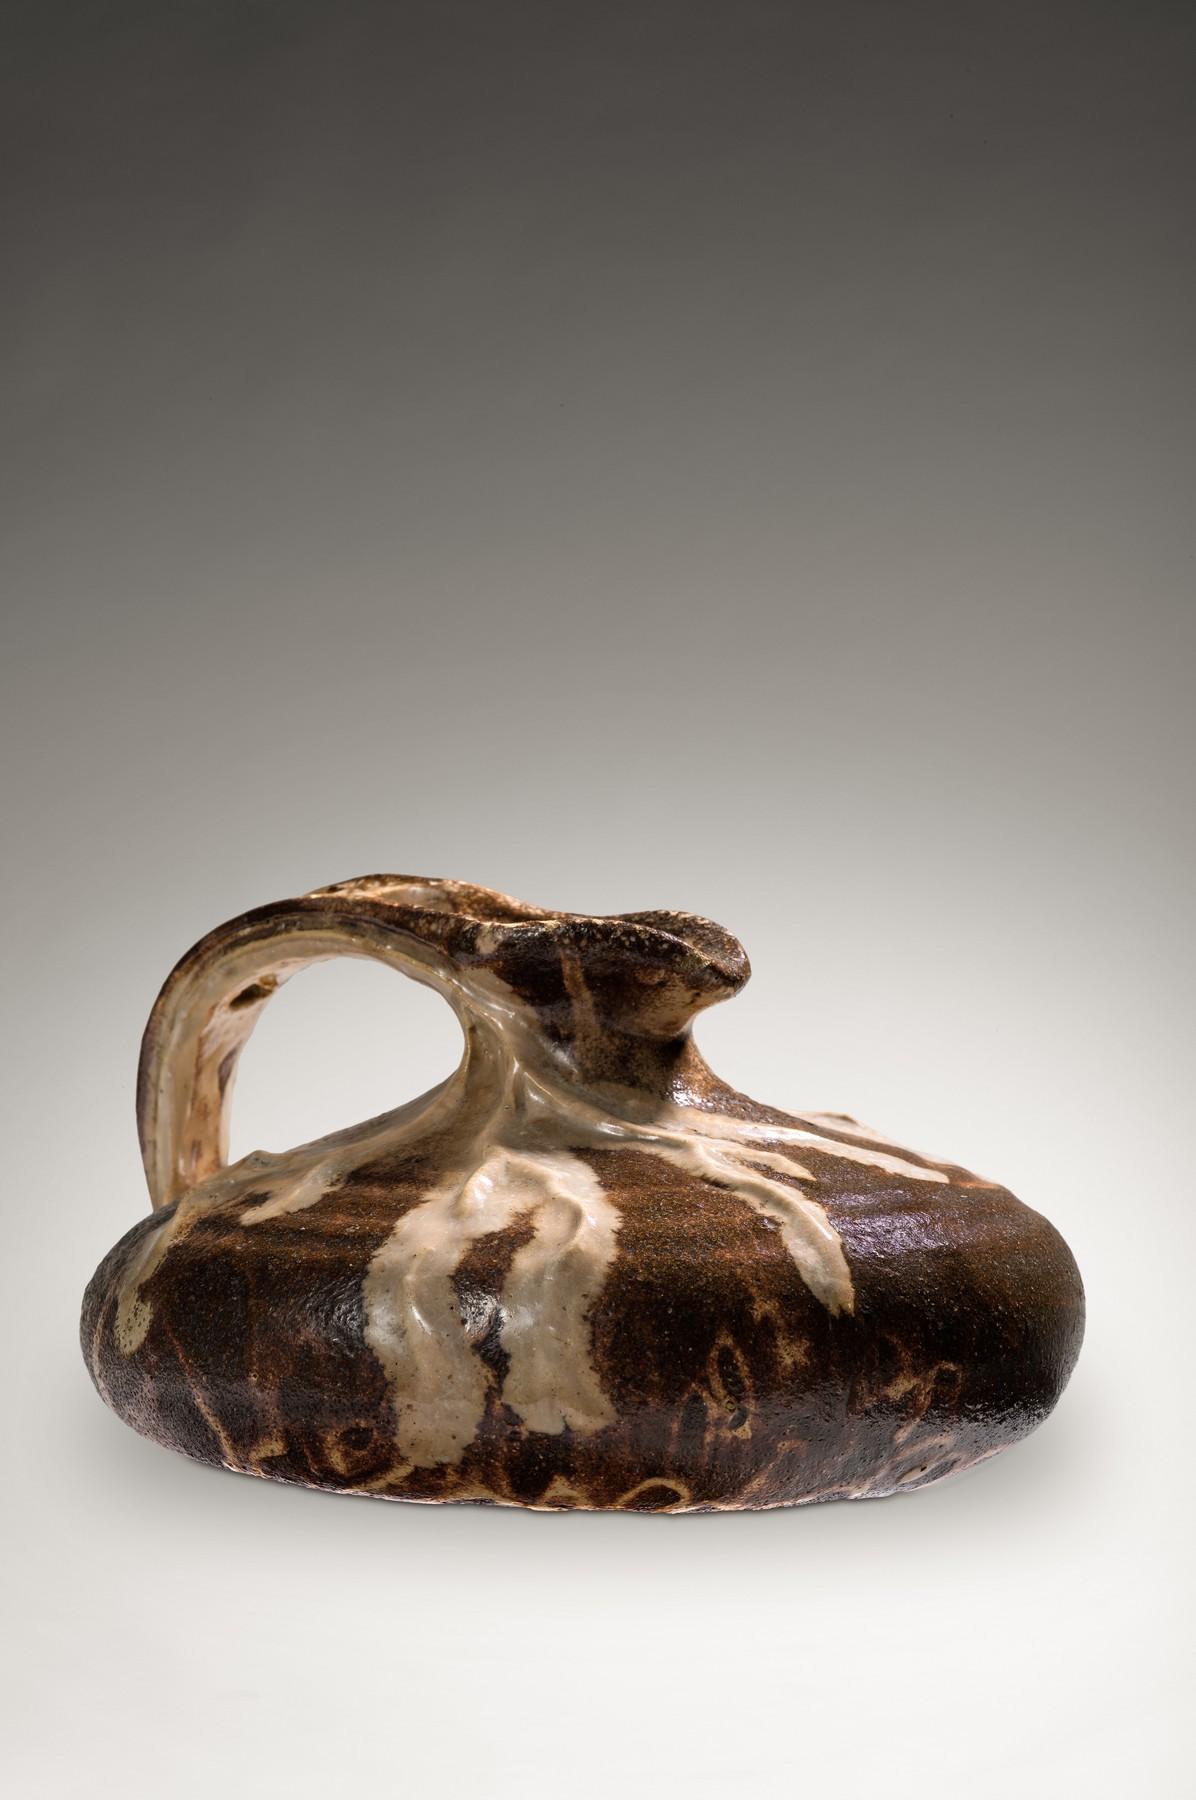 André Metthey, author of this masterpiece of stoneware, is not in his first ceramic experiment when he produces this unpublished object. The pitcher relatively flattened, consists of a curved, circular belly, ending in a flared neck with a narrow